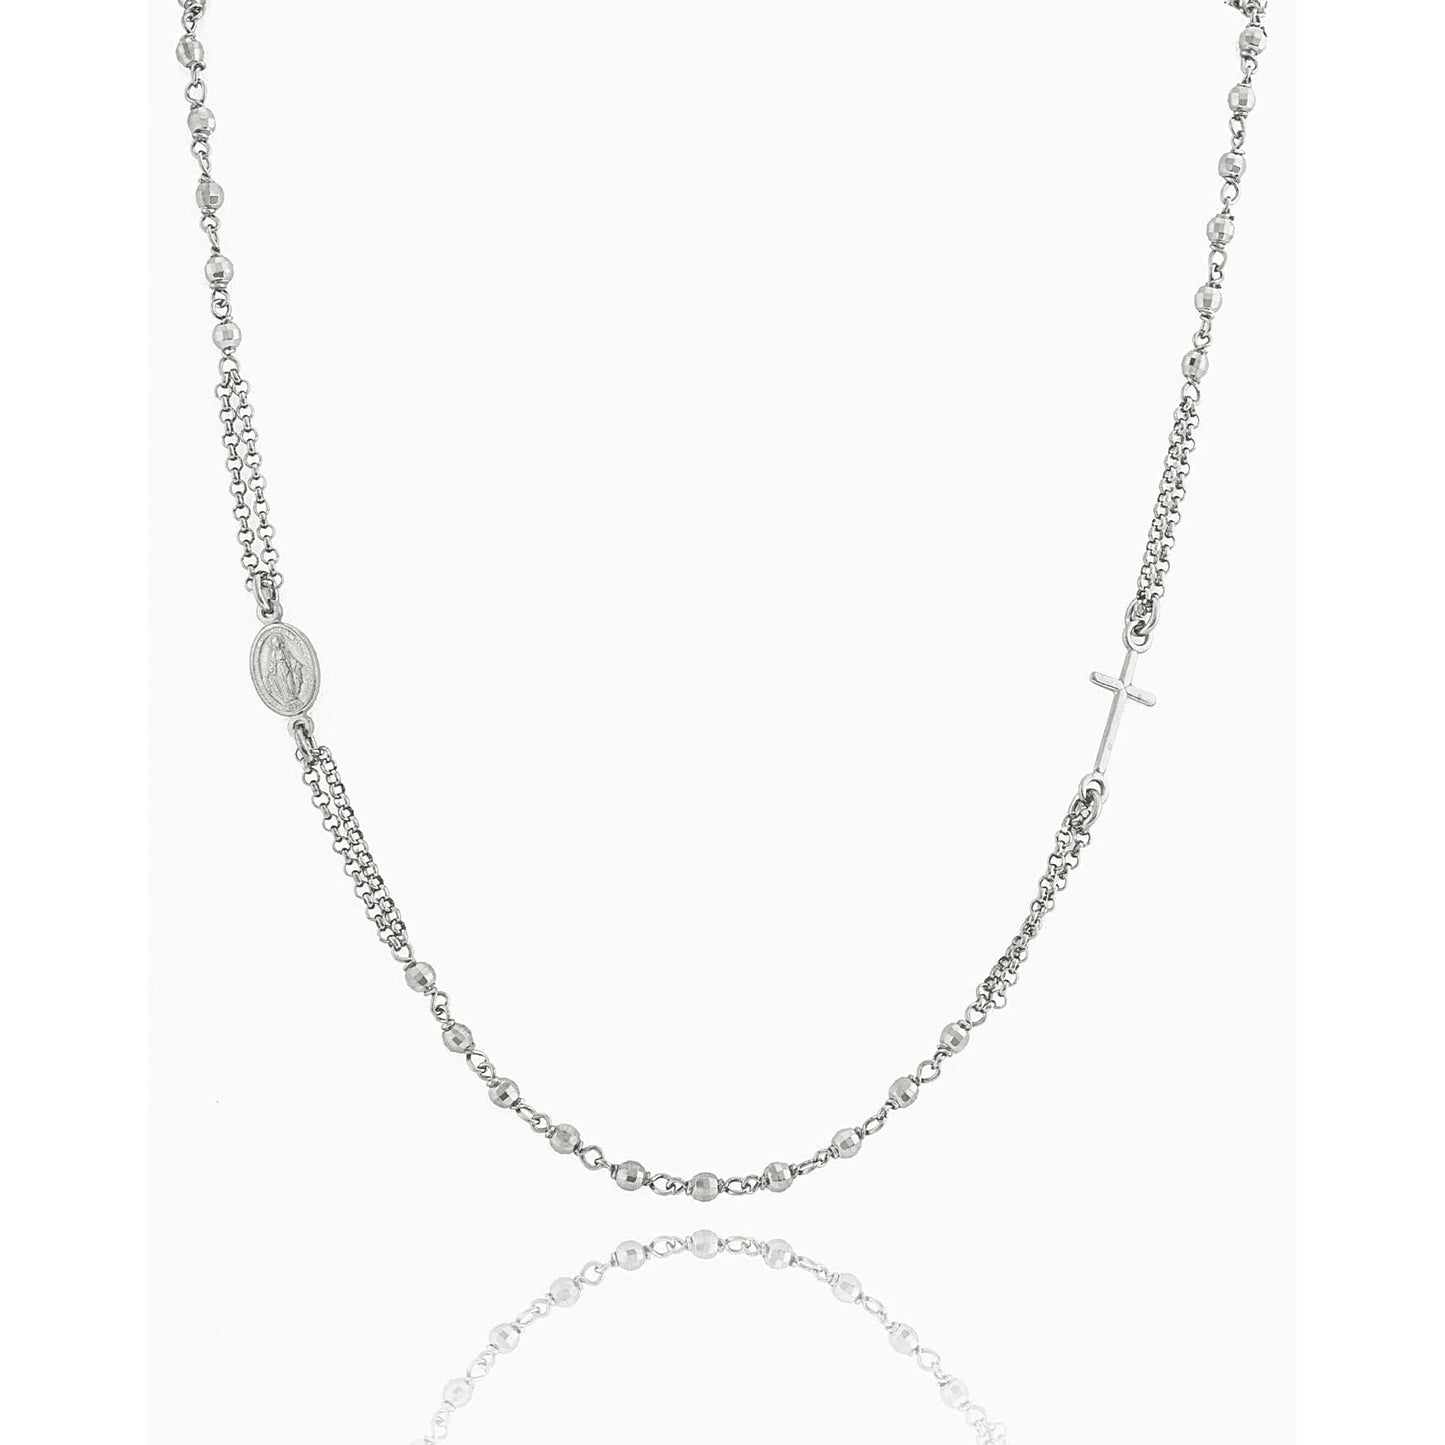 MONDO CATTOLICO Necklaces Dark Rhodium / Cm 46 (18.1 in) STERLING SILVER PLATED 3 MM BEADS NECKLACE